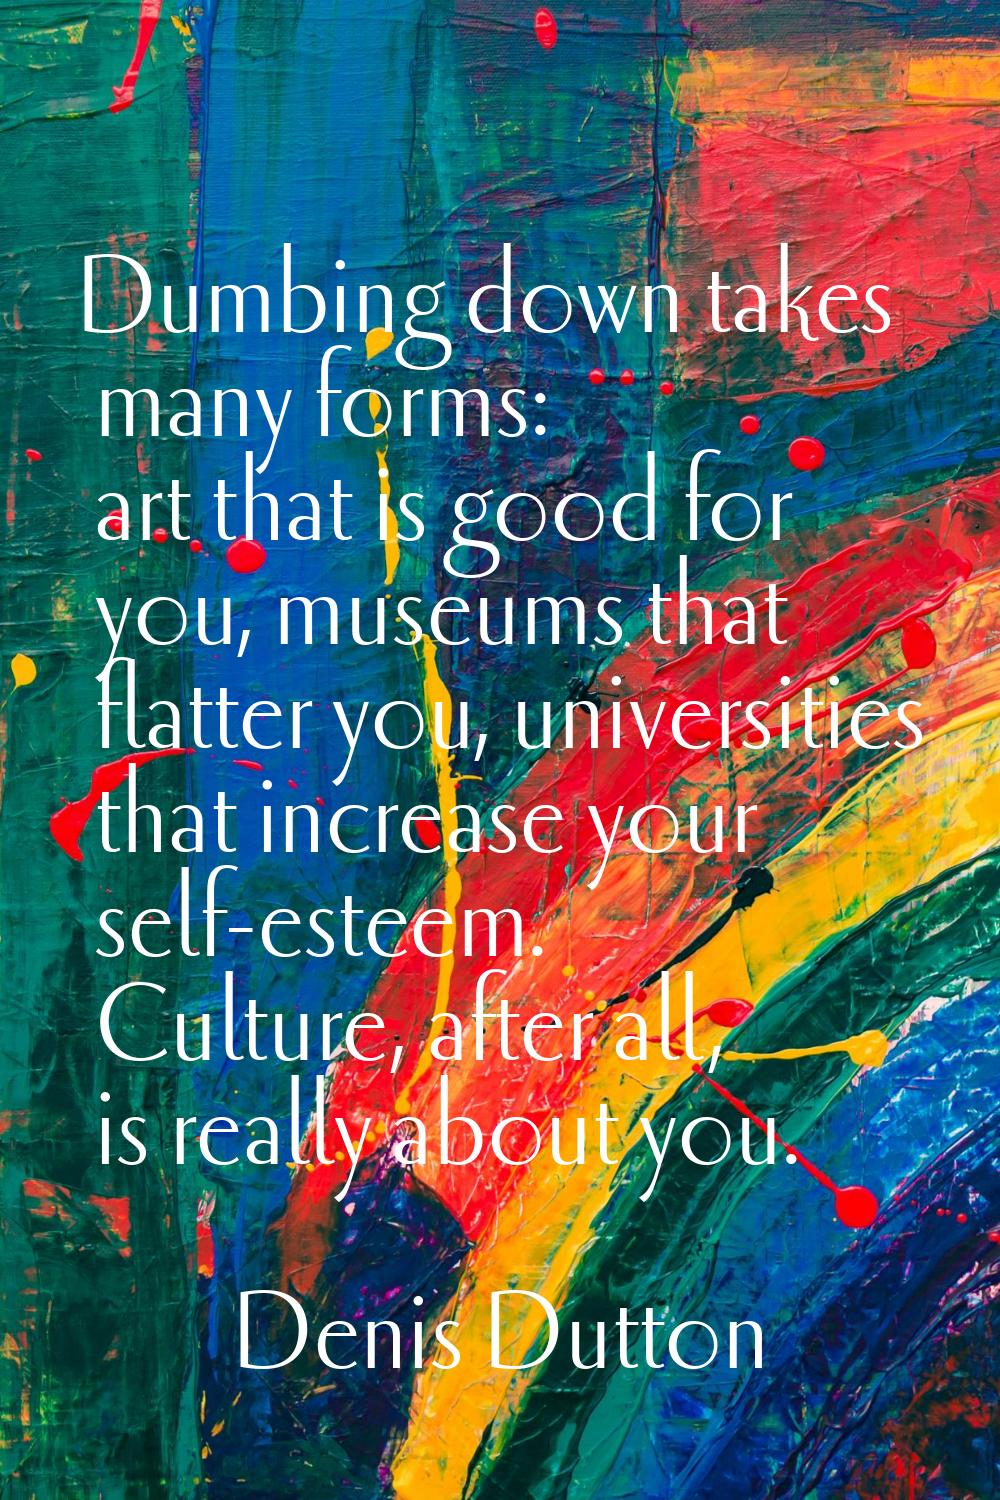 Dumbing down takes many forms: art that is good for you, museums that flatter you, universities tha